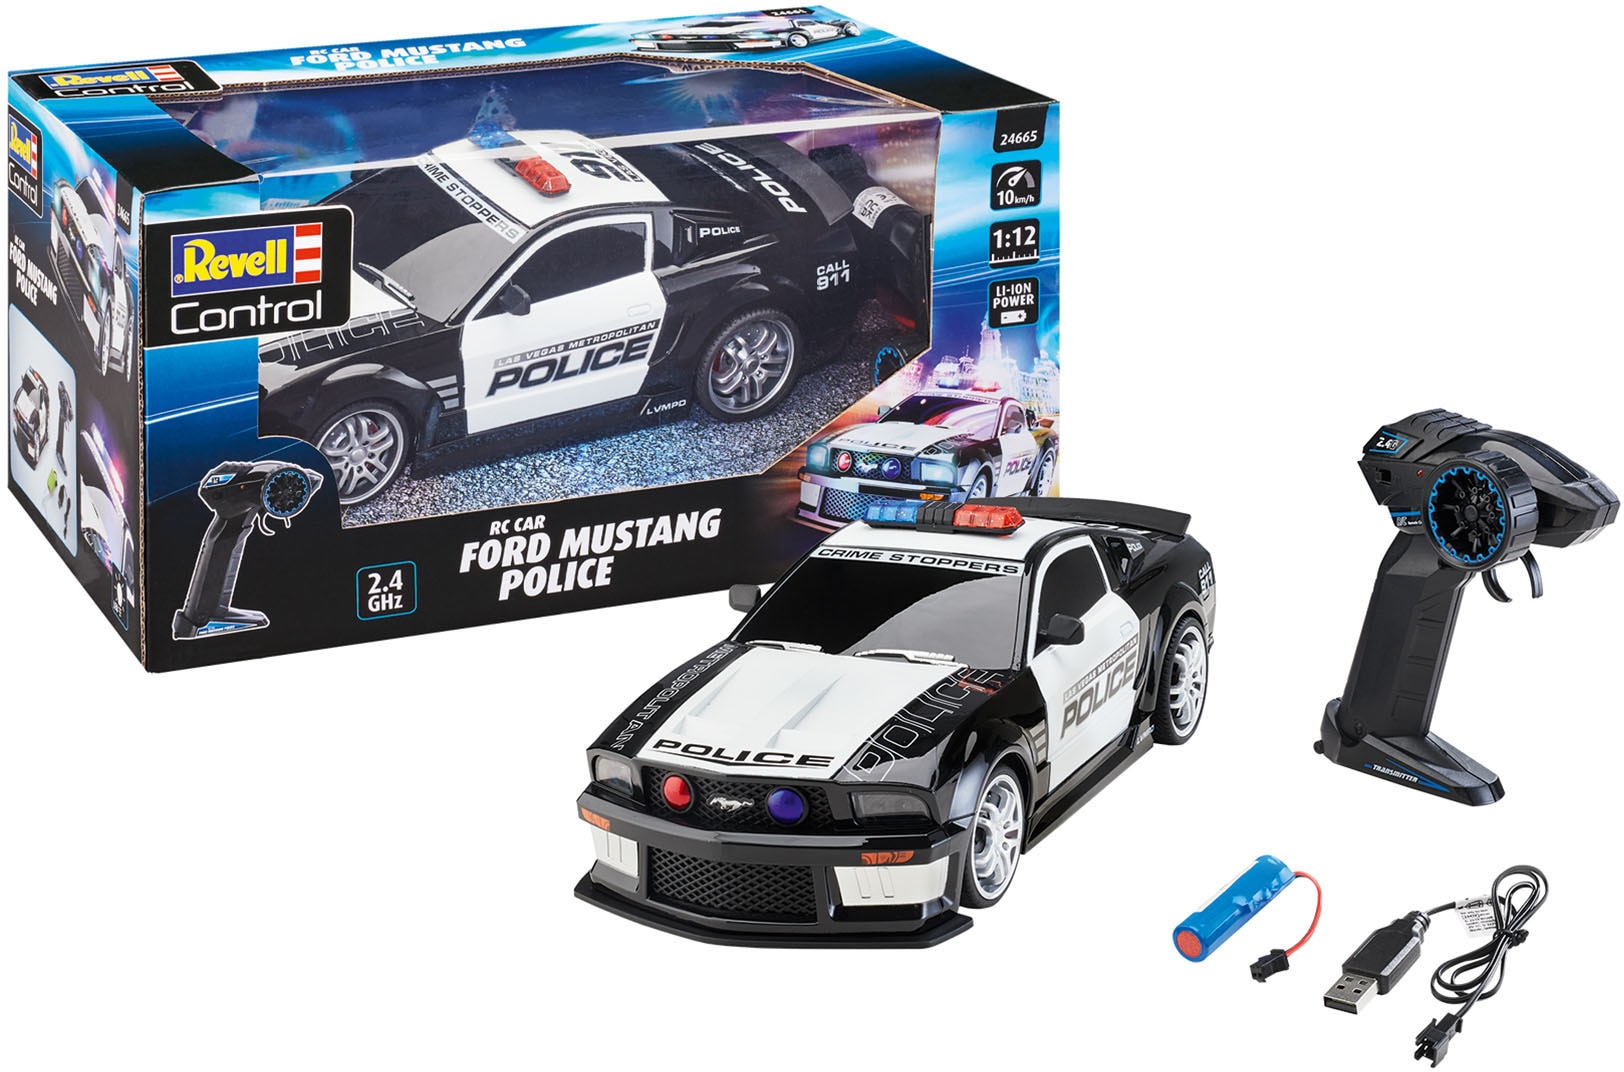 RC-Auto »Revell® control, Ford Mustang Police«